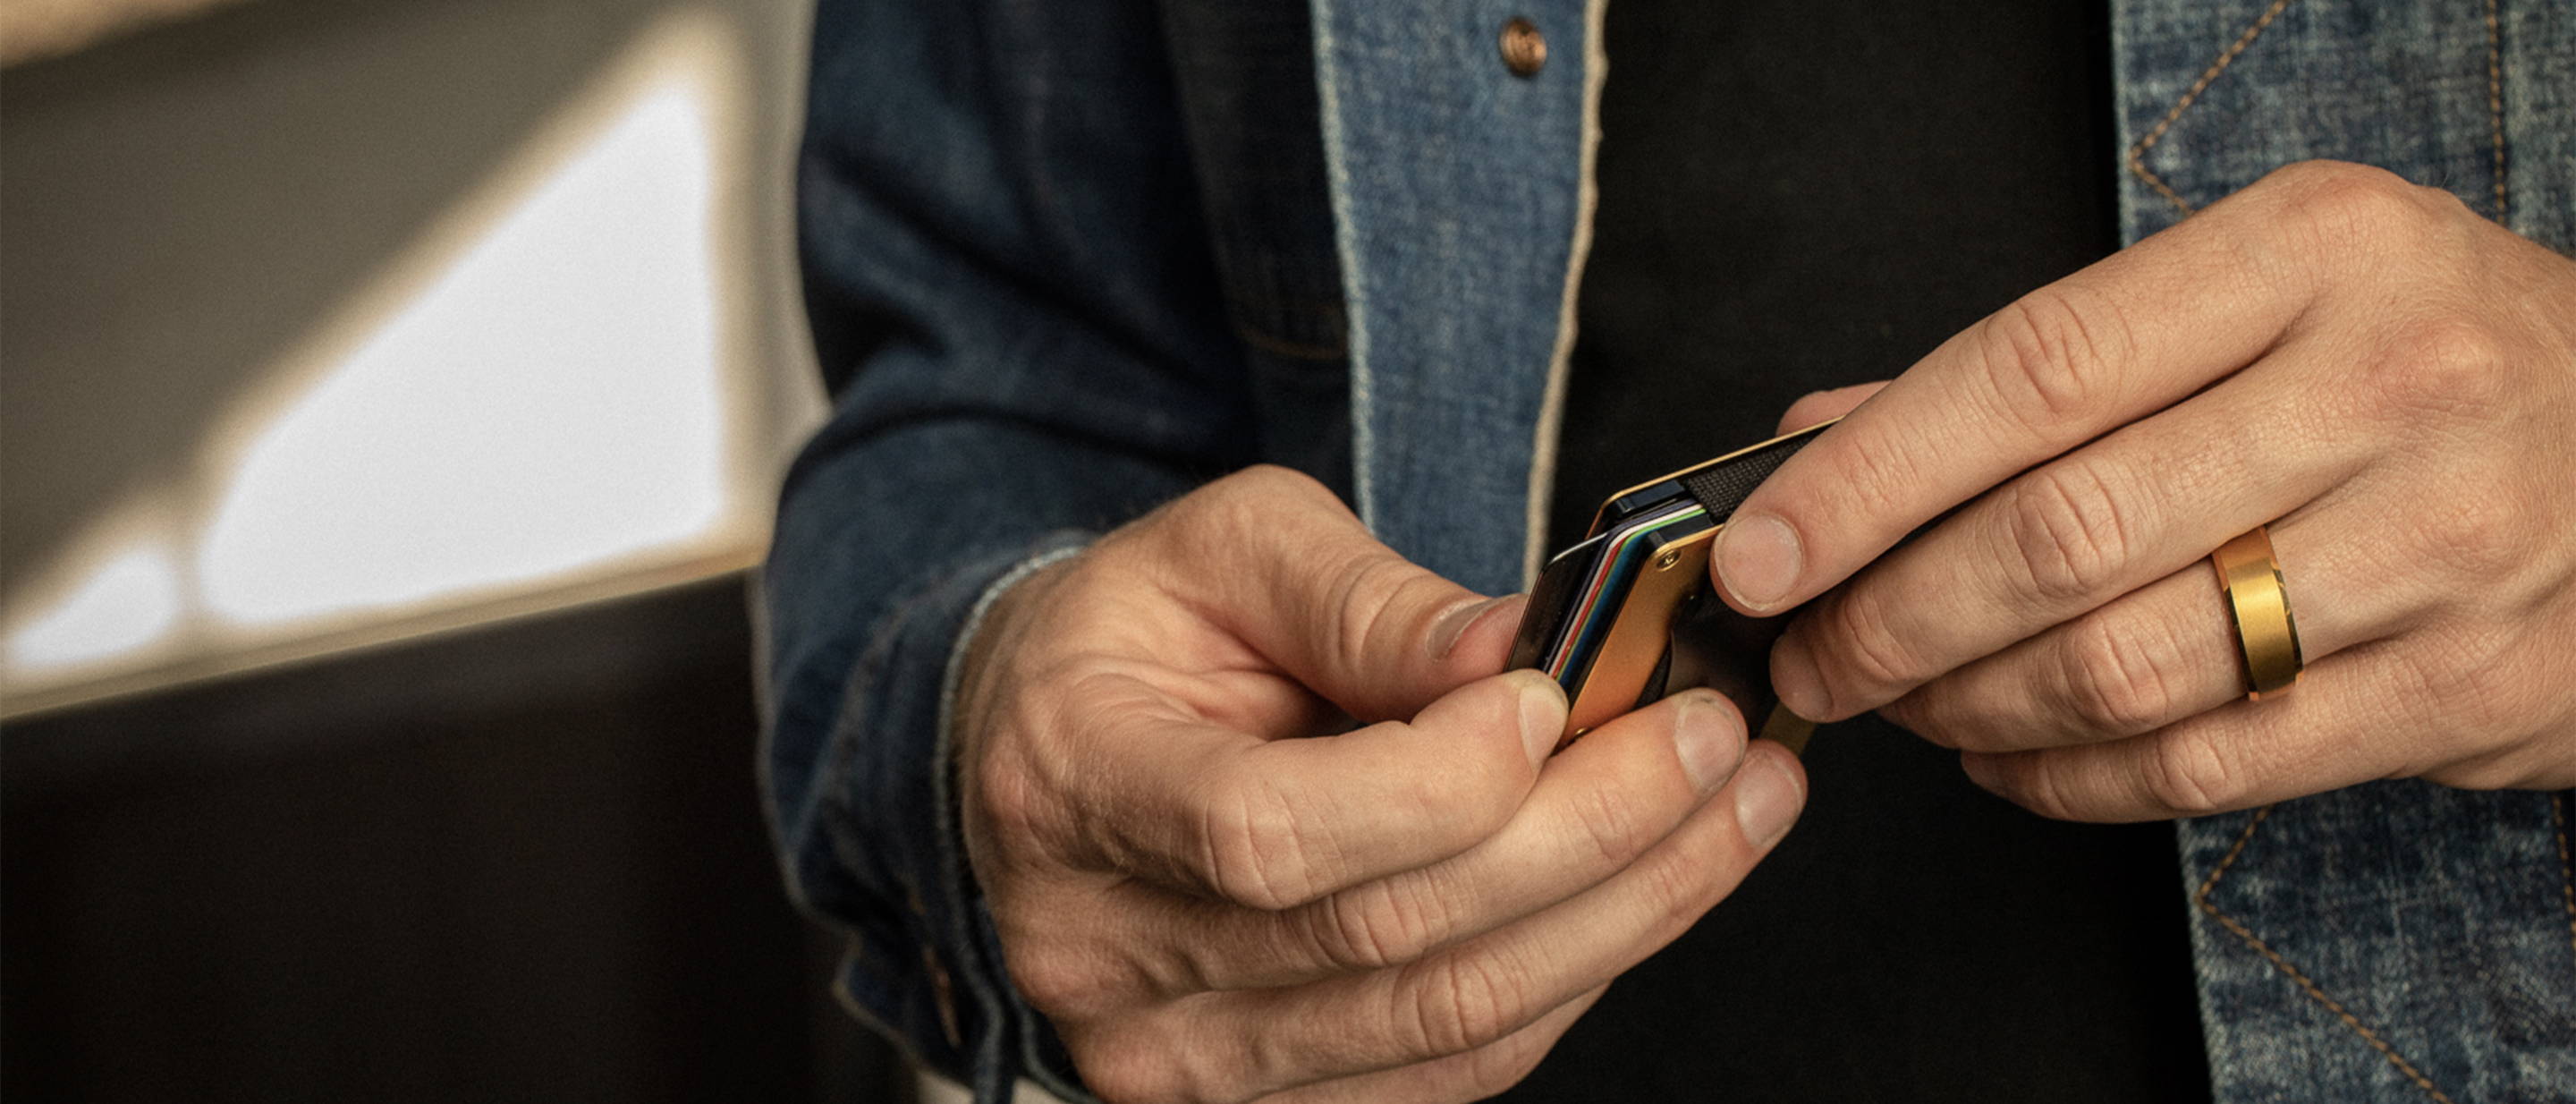 man checking out cards while wearing a Ridge 8MM Beveled Ring on his finger